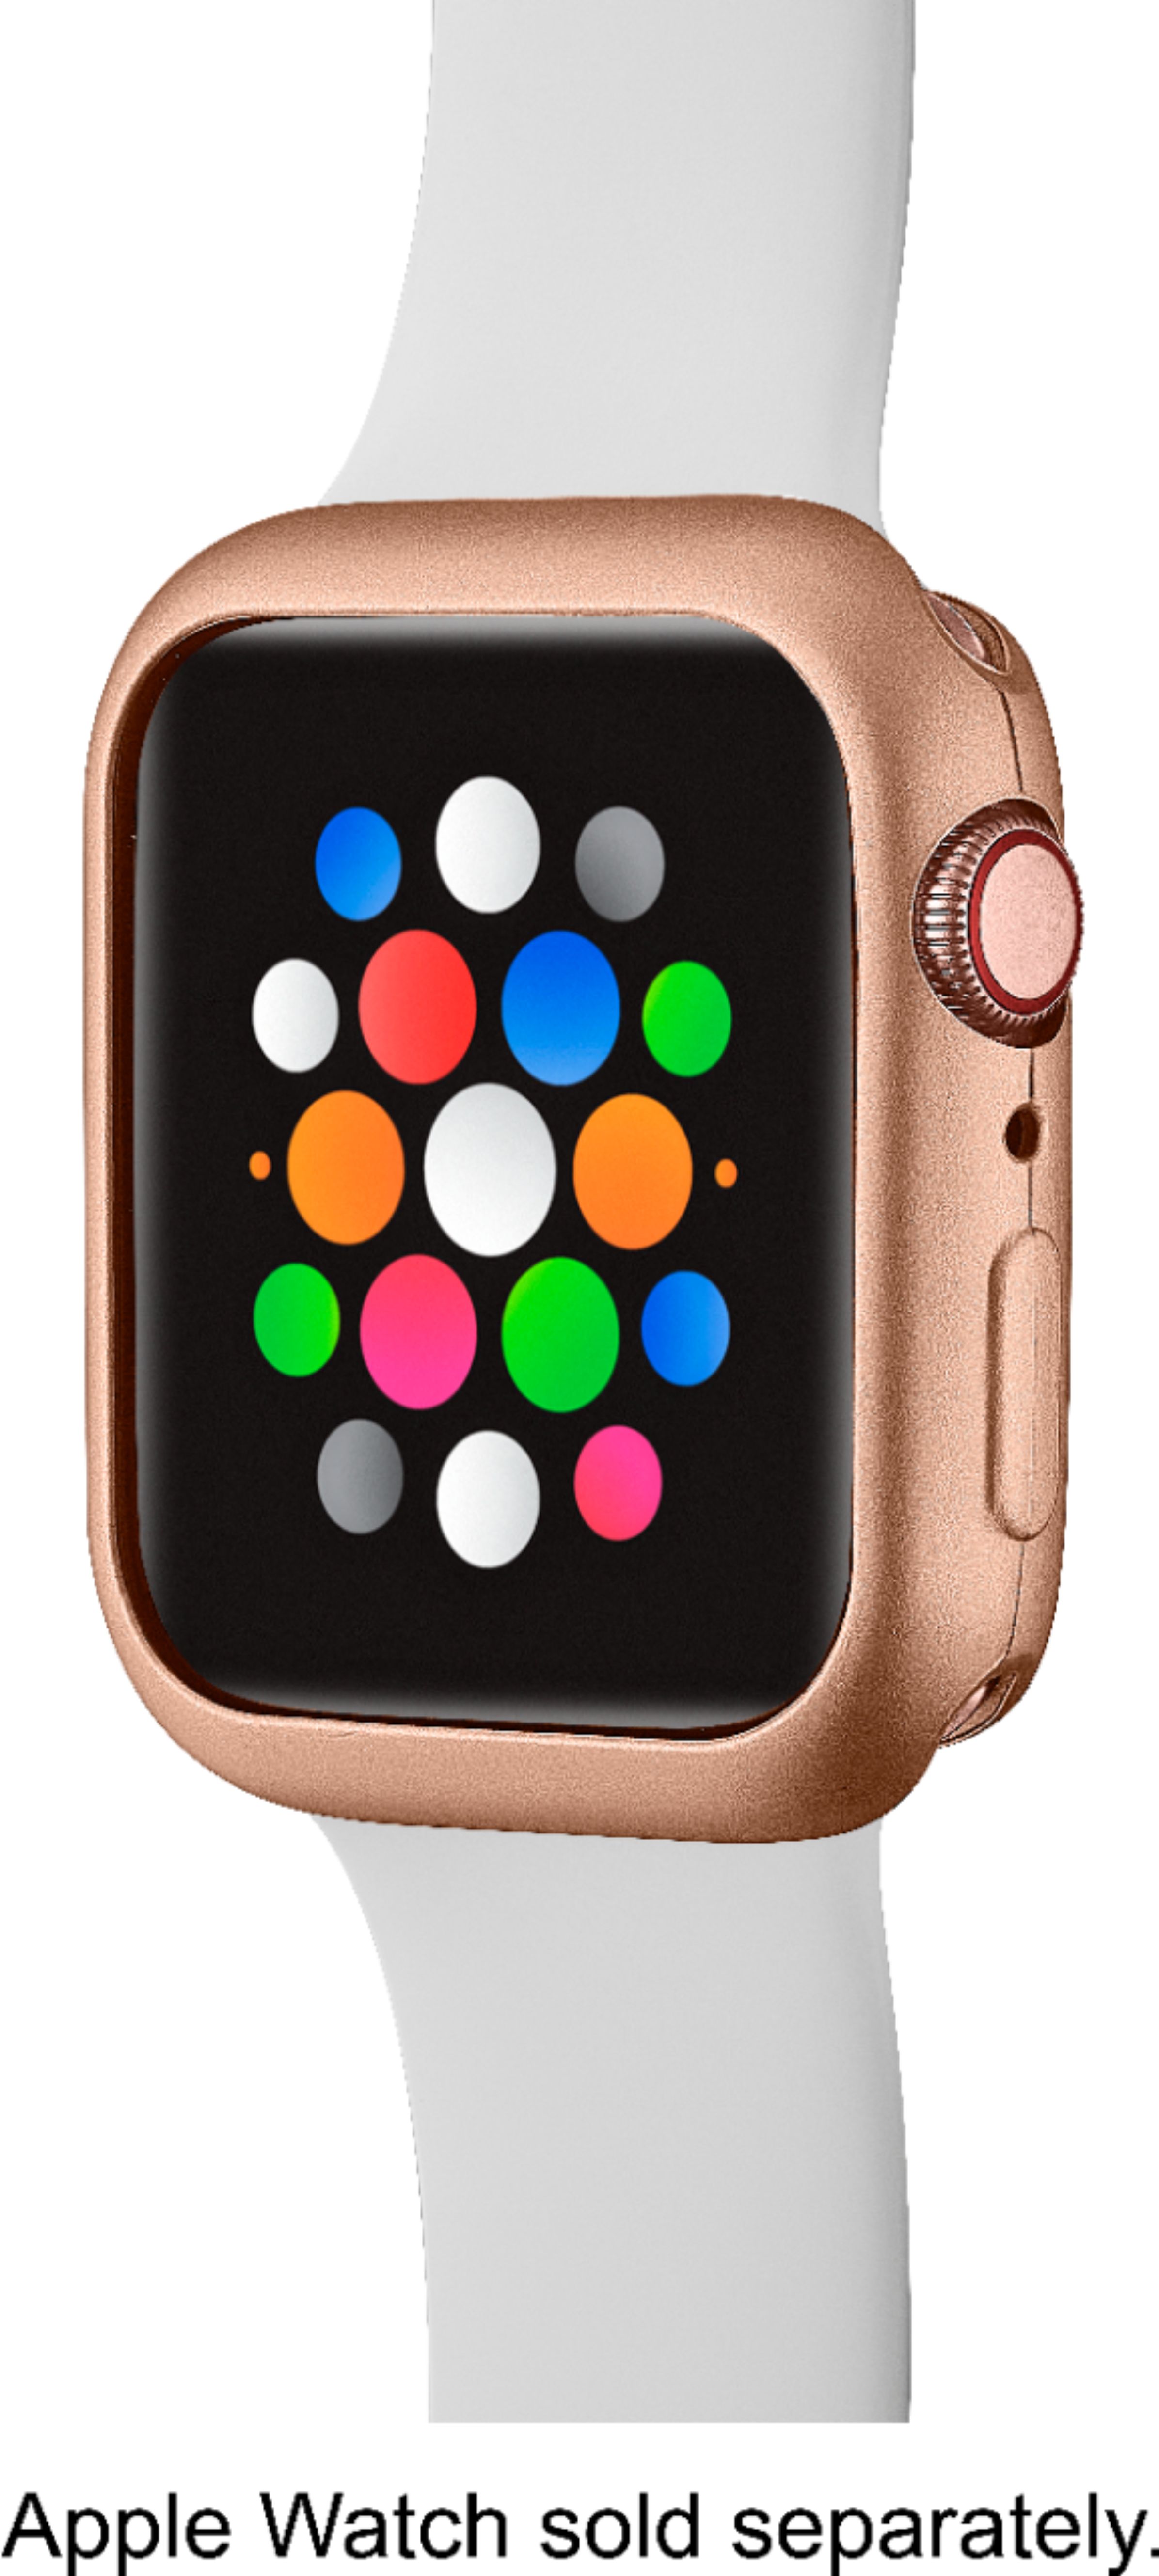 Left View: kate spade new york - Silicone Watch Strap for Apple Watch™ 42mm Series 1, 2, 3, and Apple Watch™ 44mm Series 4 and 5 - Black